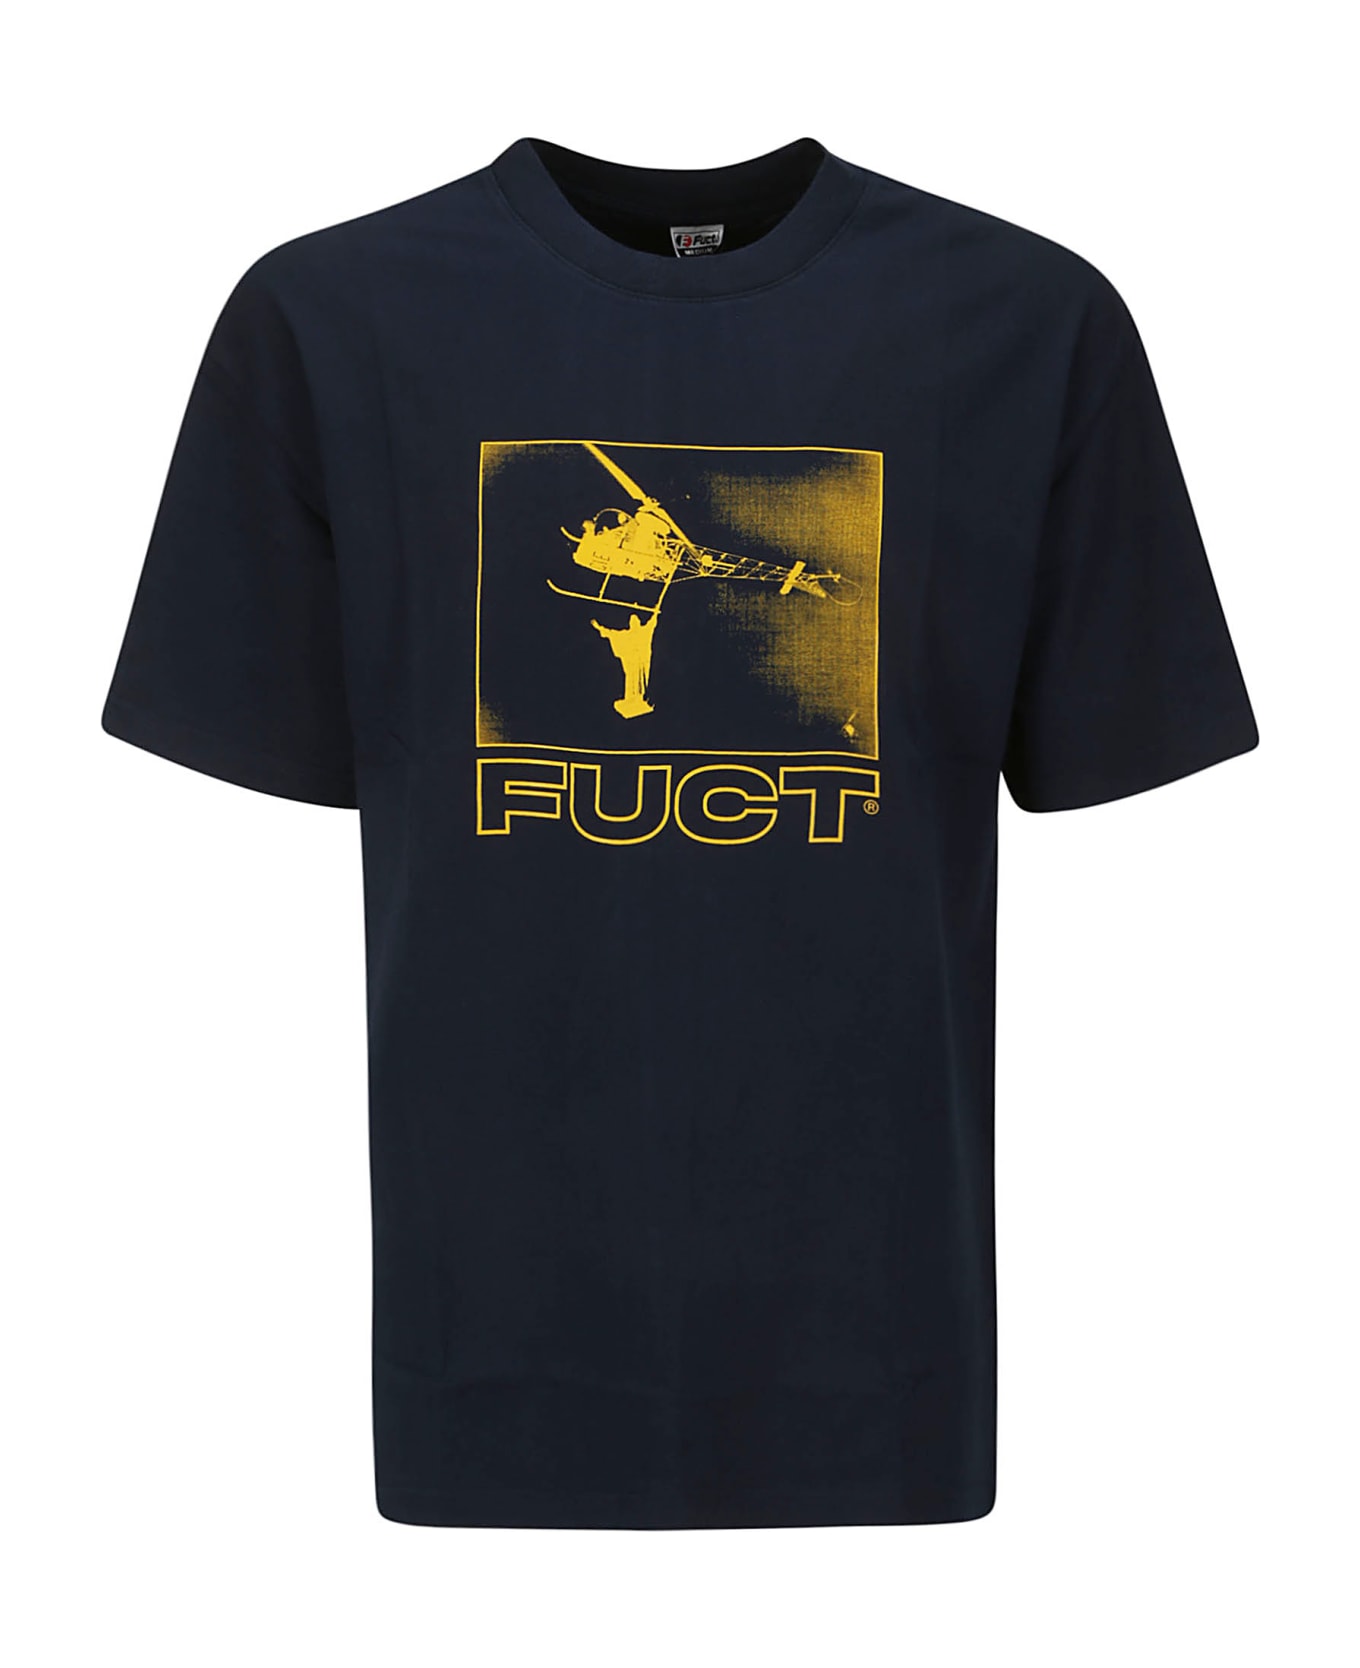 Fuct Helicopter Tee - BLUE